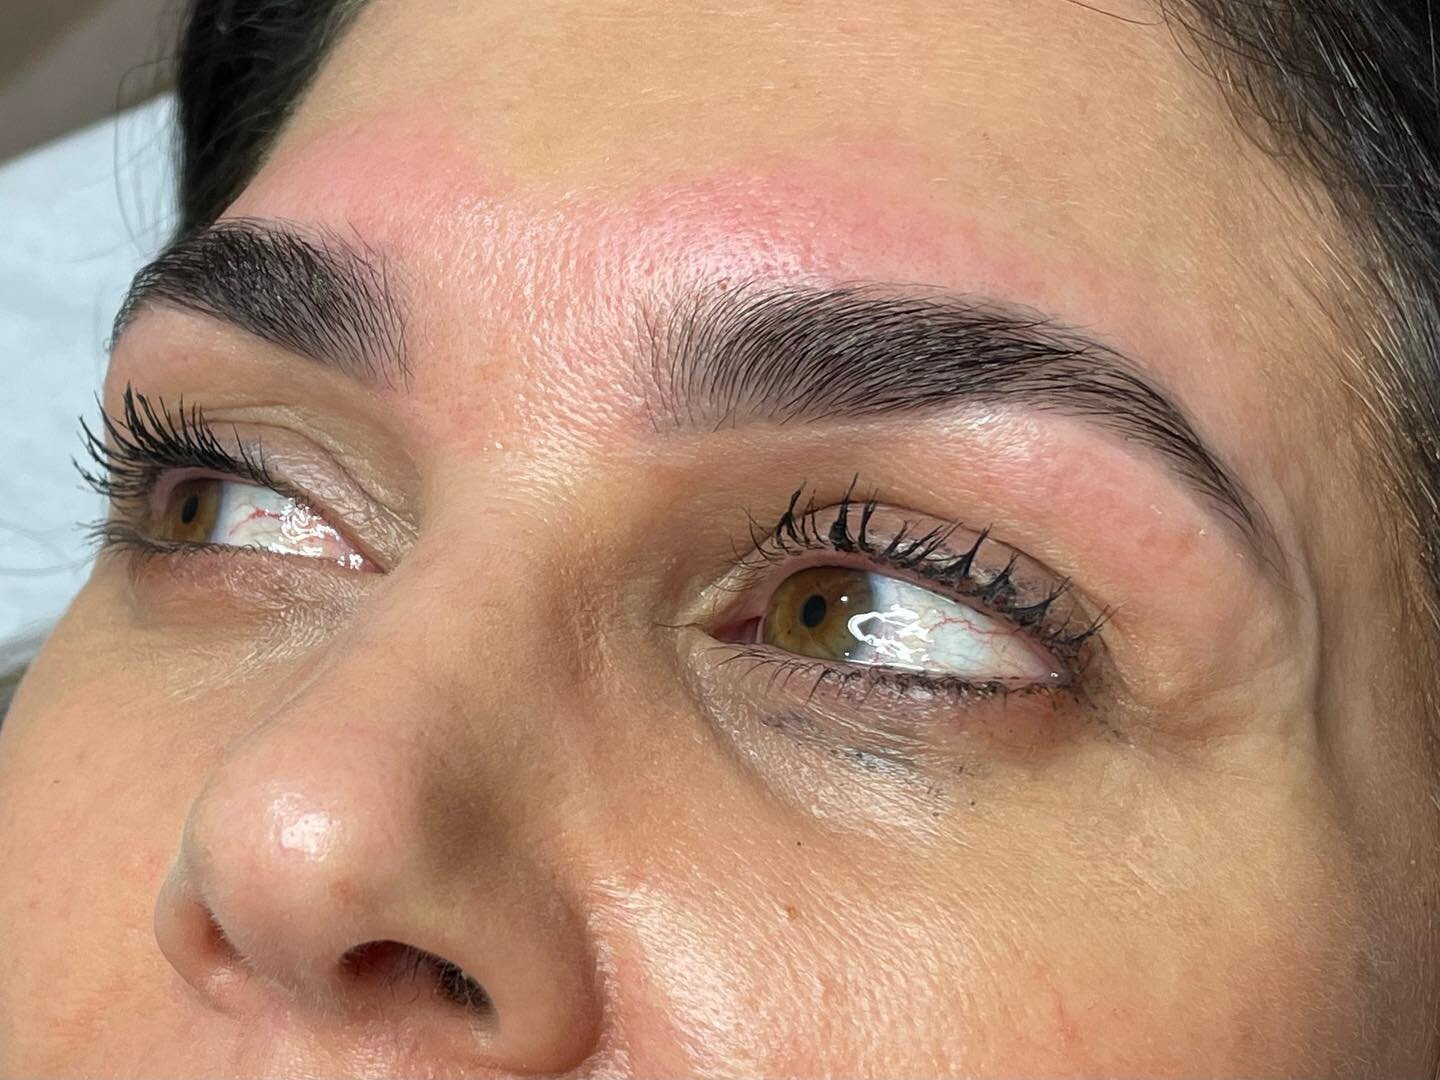 Fox studios highlights 

Eyebrow wax and tint
Lamination with tint and wax
Helix piercing
Third lobe
Eyebrow wax and tint
Lamination maintenance
Eyebrow wax and tint
Brow wax
Combo microbladed brow maintenence
Bridal makeup (no longer offering this t